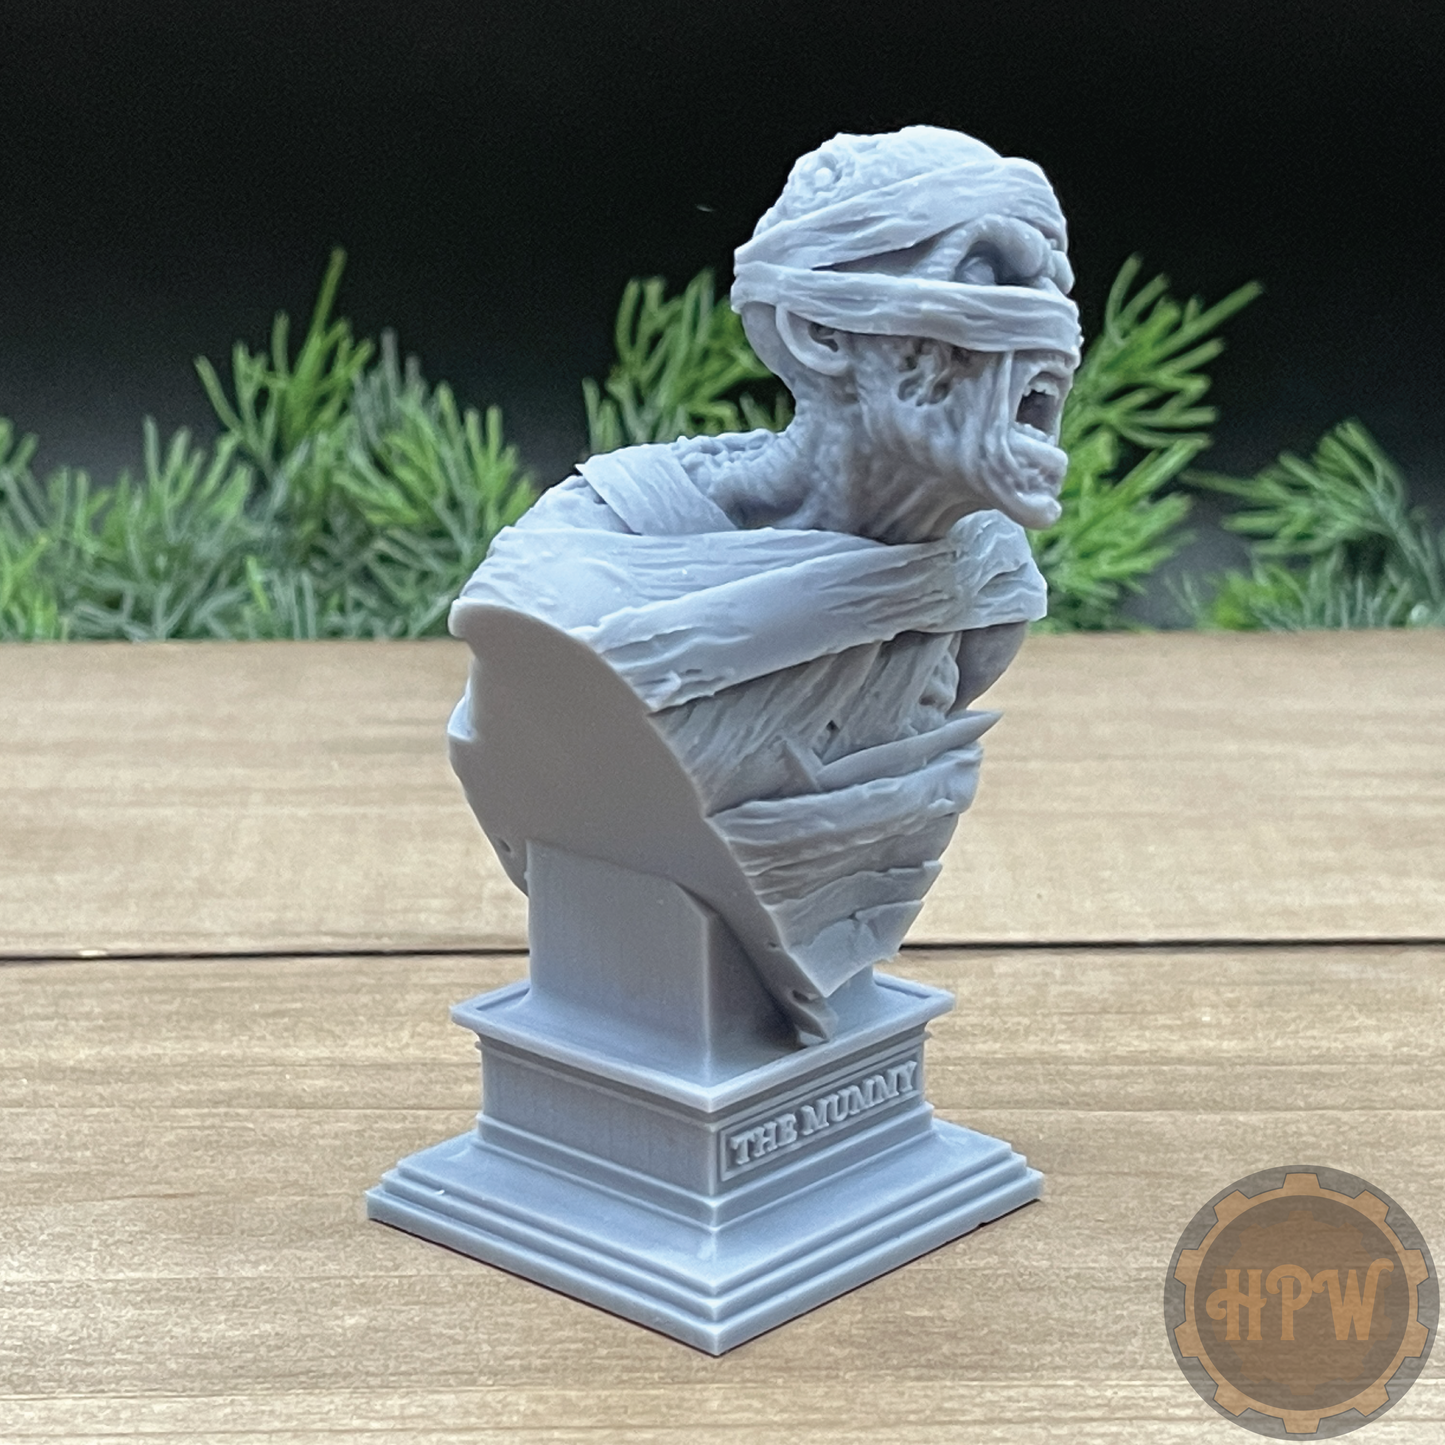 Mummy Bust | Undead Statue | Heroes & Beasts | Classic Movie Monsters